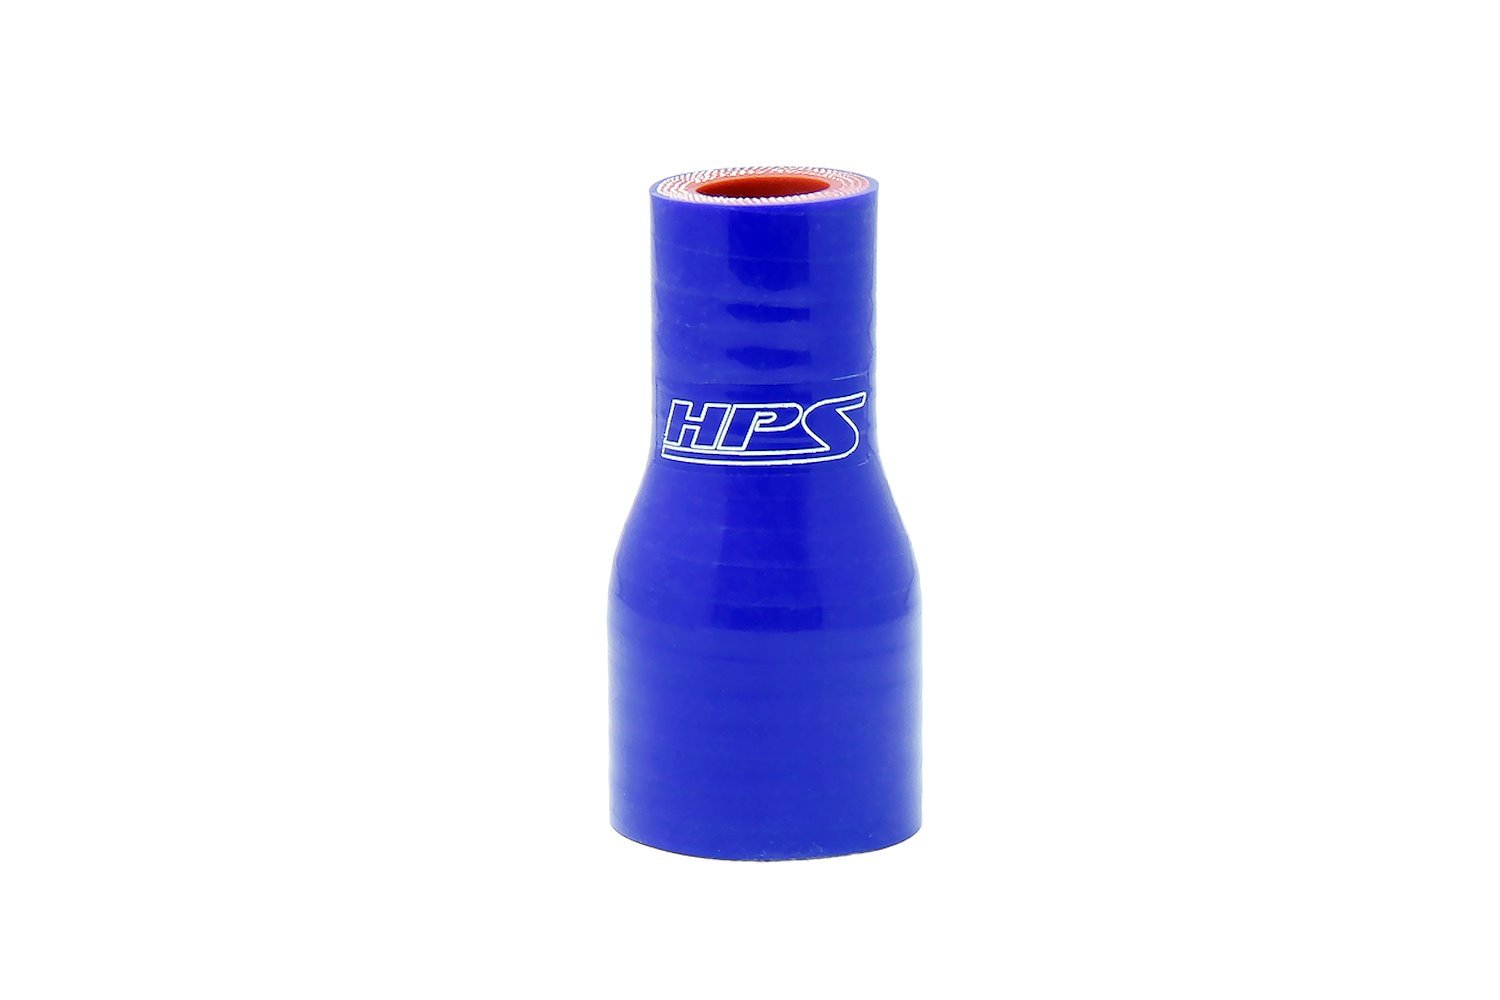 HTSR-075-125-BLUE Silicone Reducer Hose, High-Temp 4-Ply Reinforced, 3/4 in. - 1-1/4 in. ID, 3 in. Long, Blue